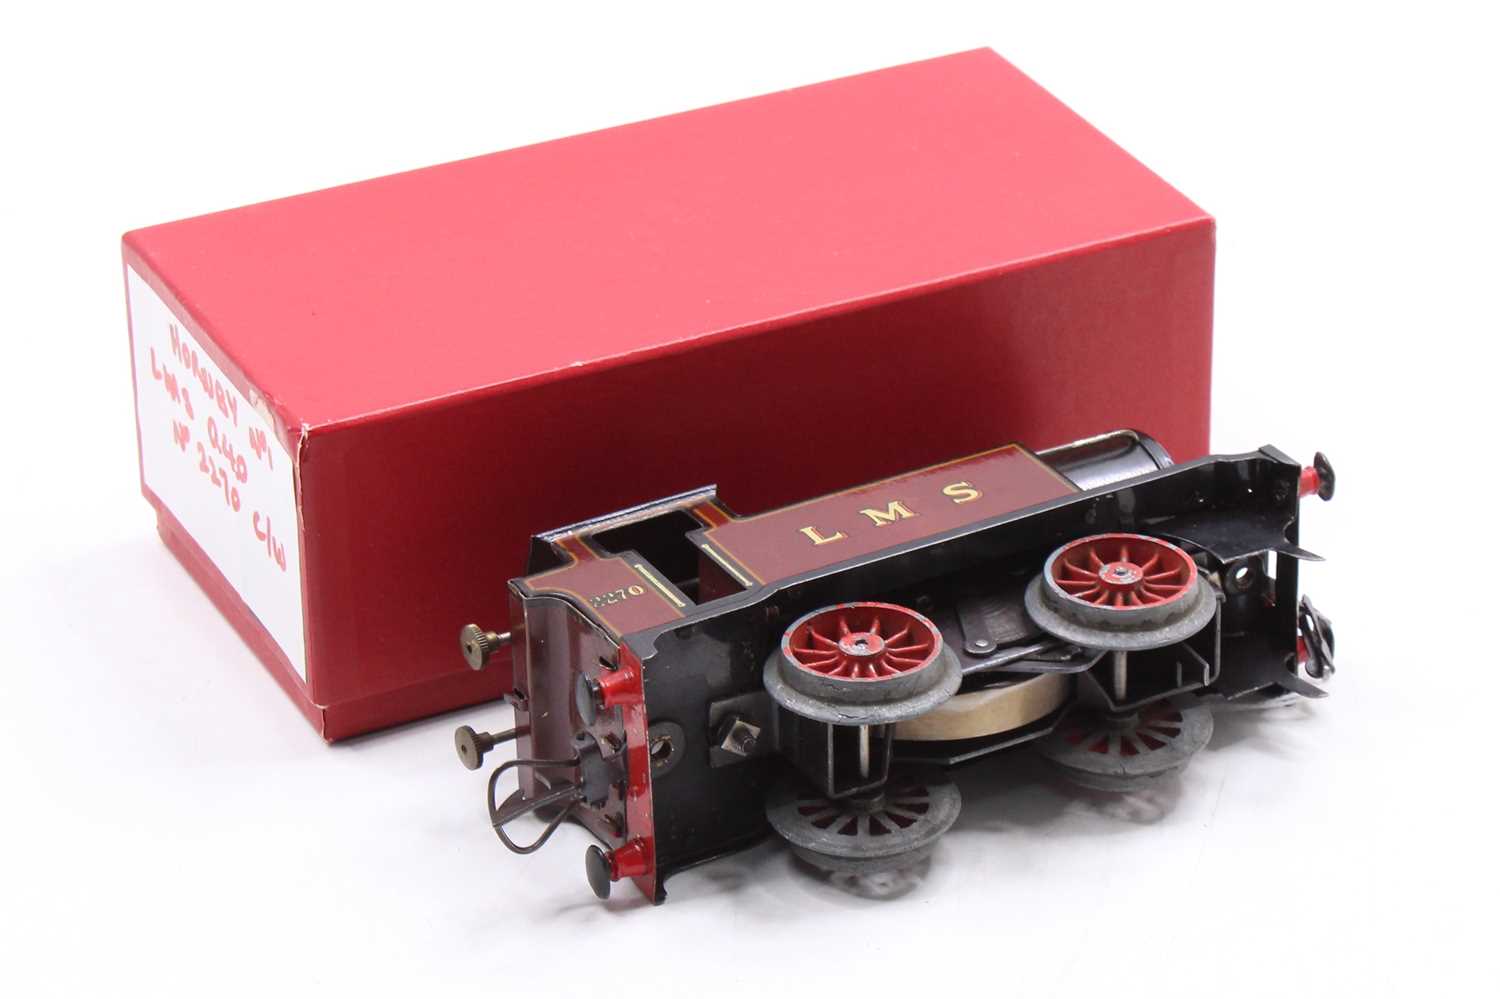 1932-6 Hornby M3 tank tin-printed loco 0-4-0 LMS 2270 red no cylinders, 12 spoke wheels, no coupling - Image 3 of 3